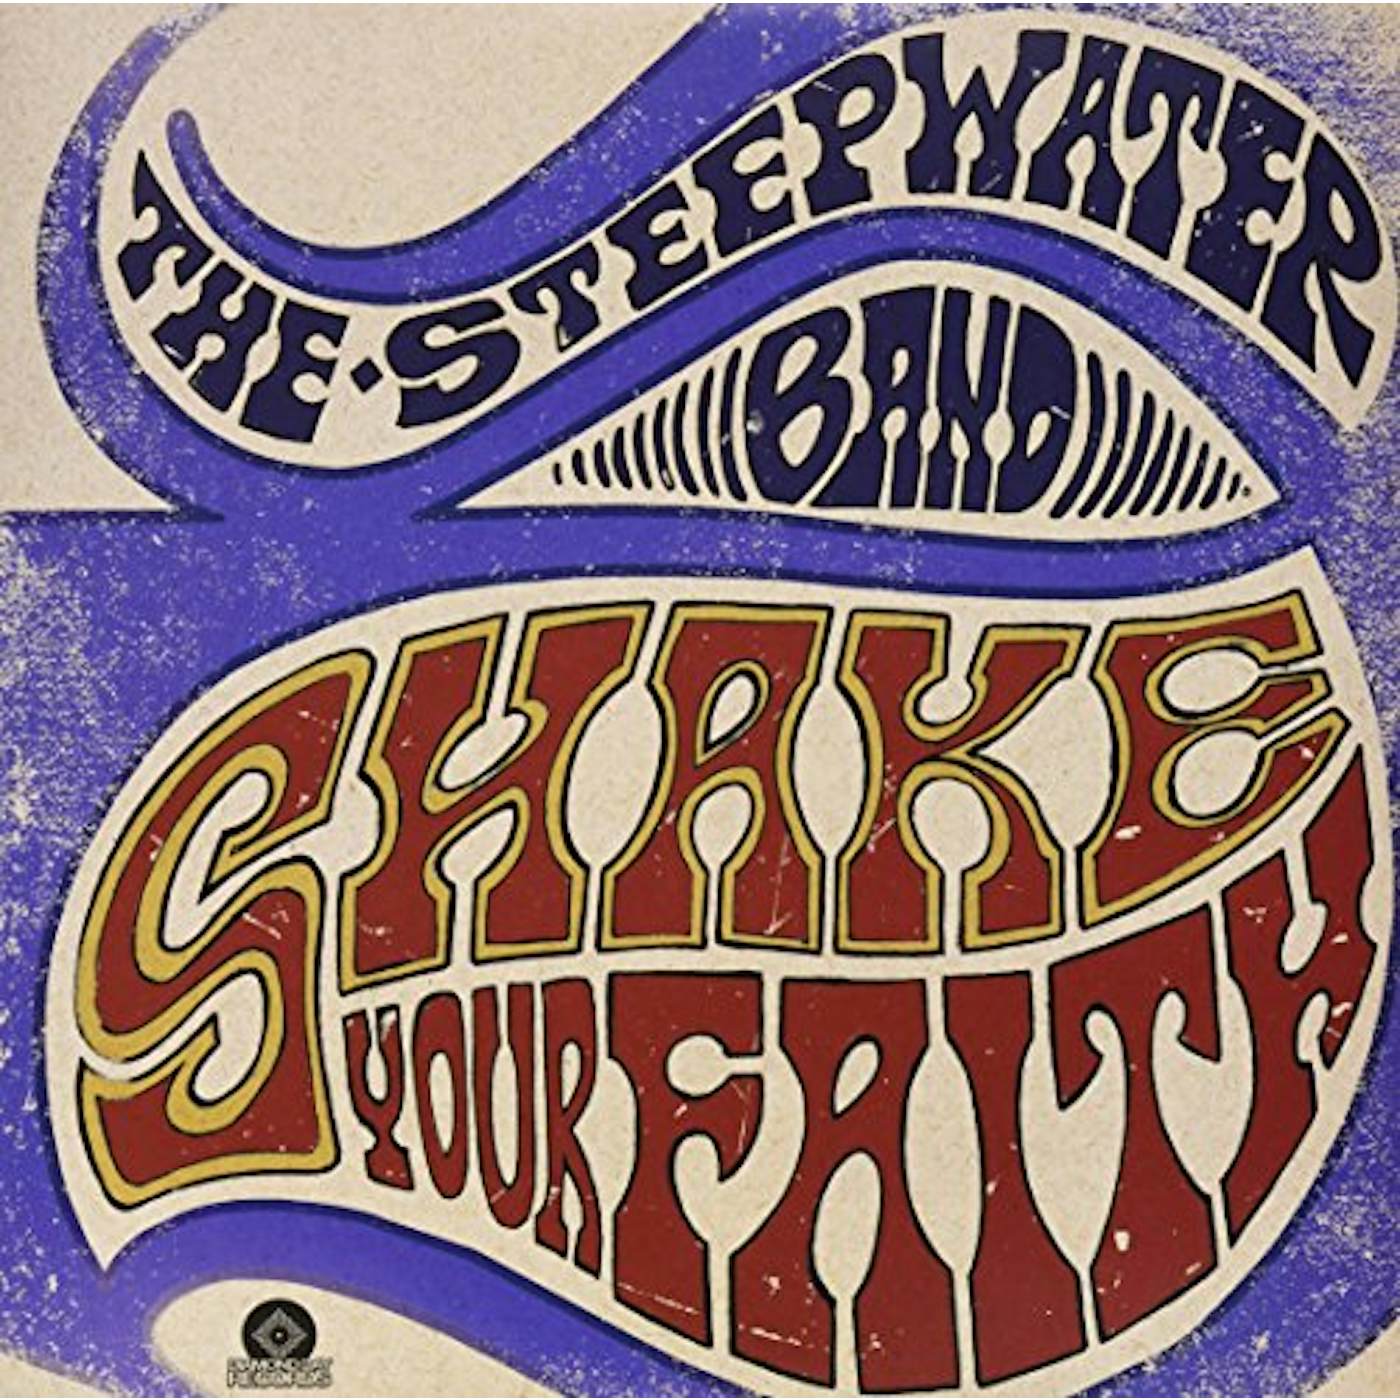 The Steepwater Band Shake Your Faith Vinyl Record